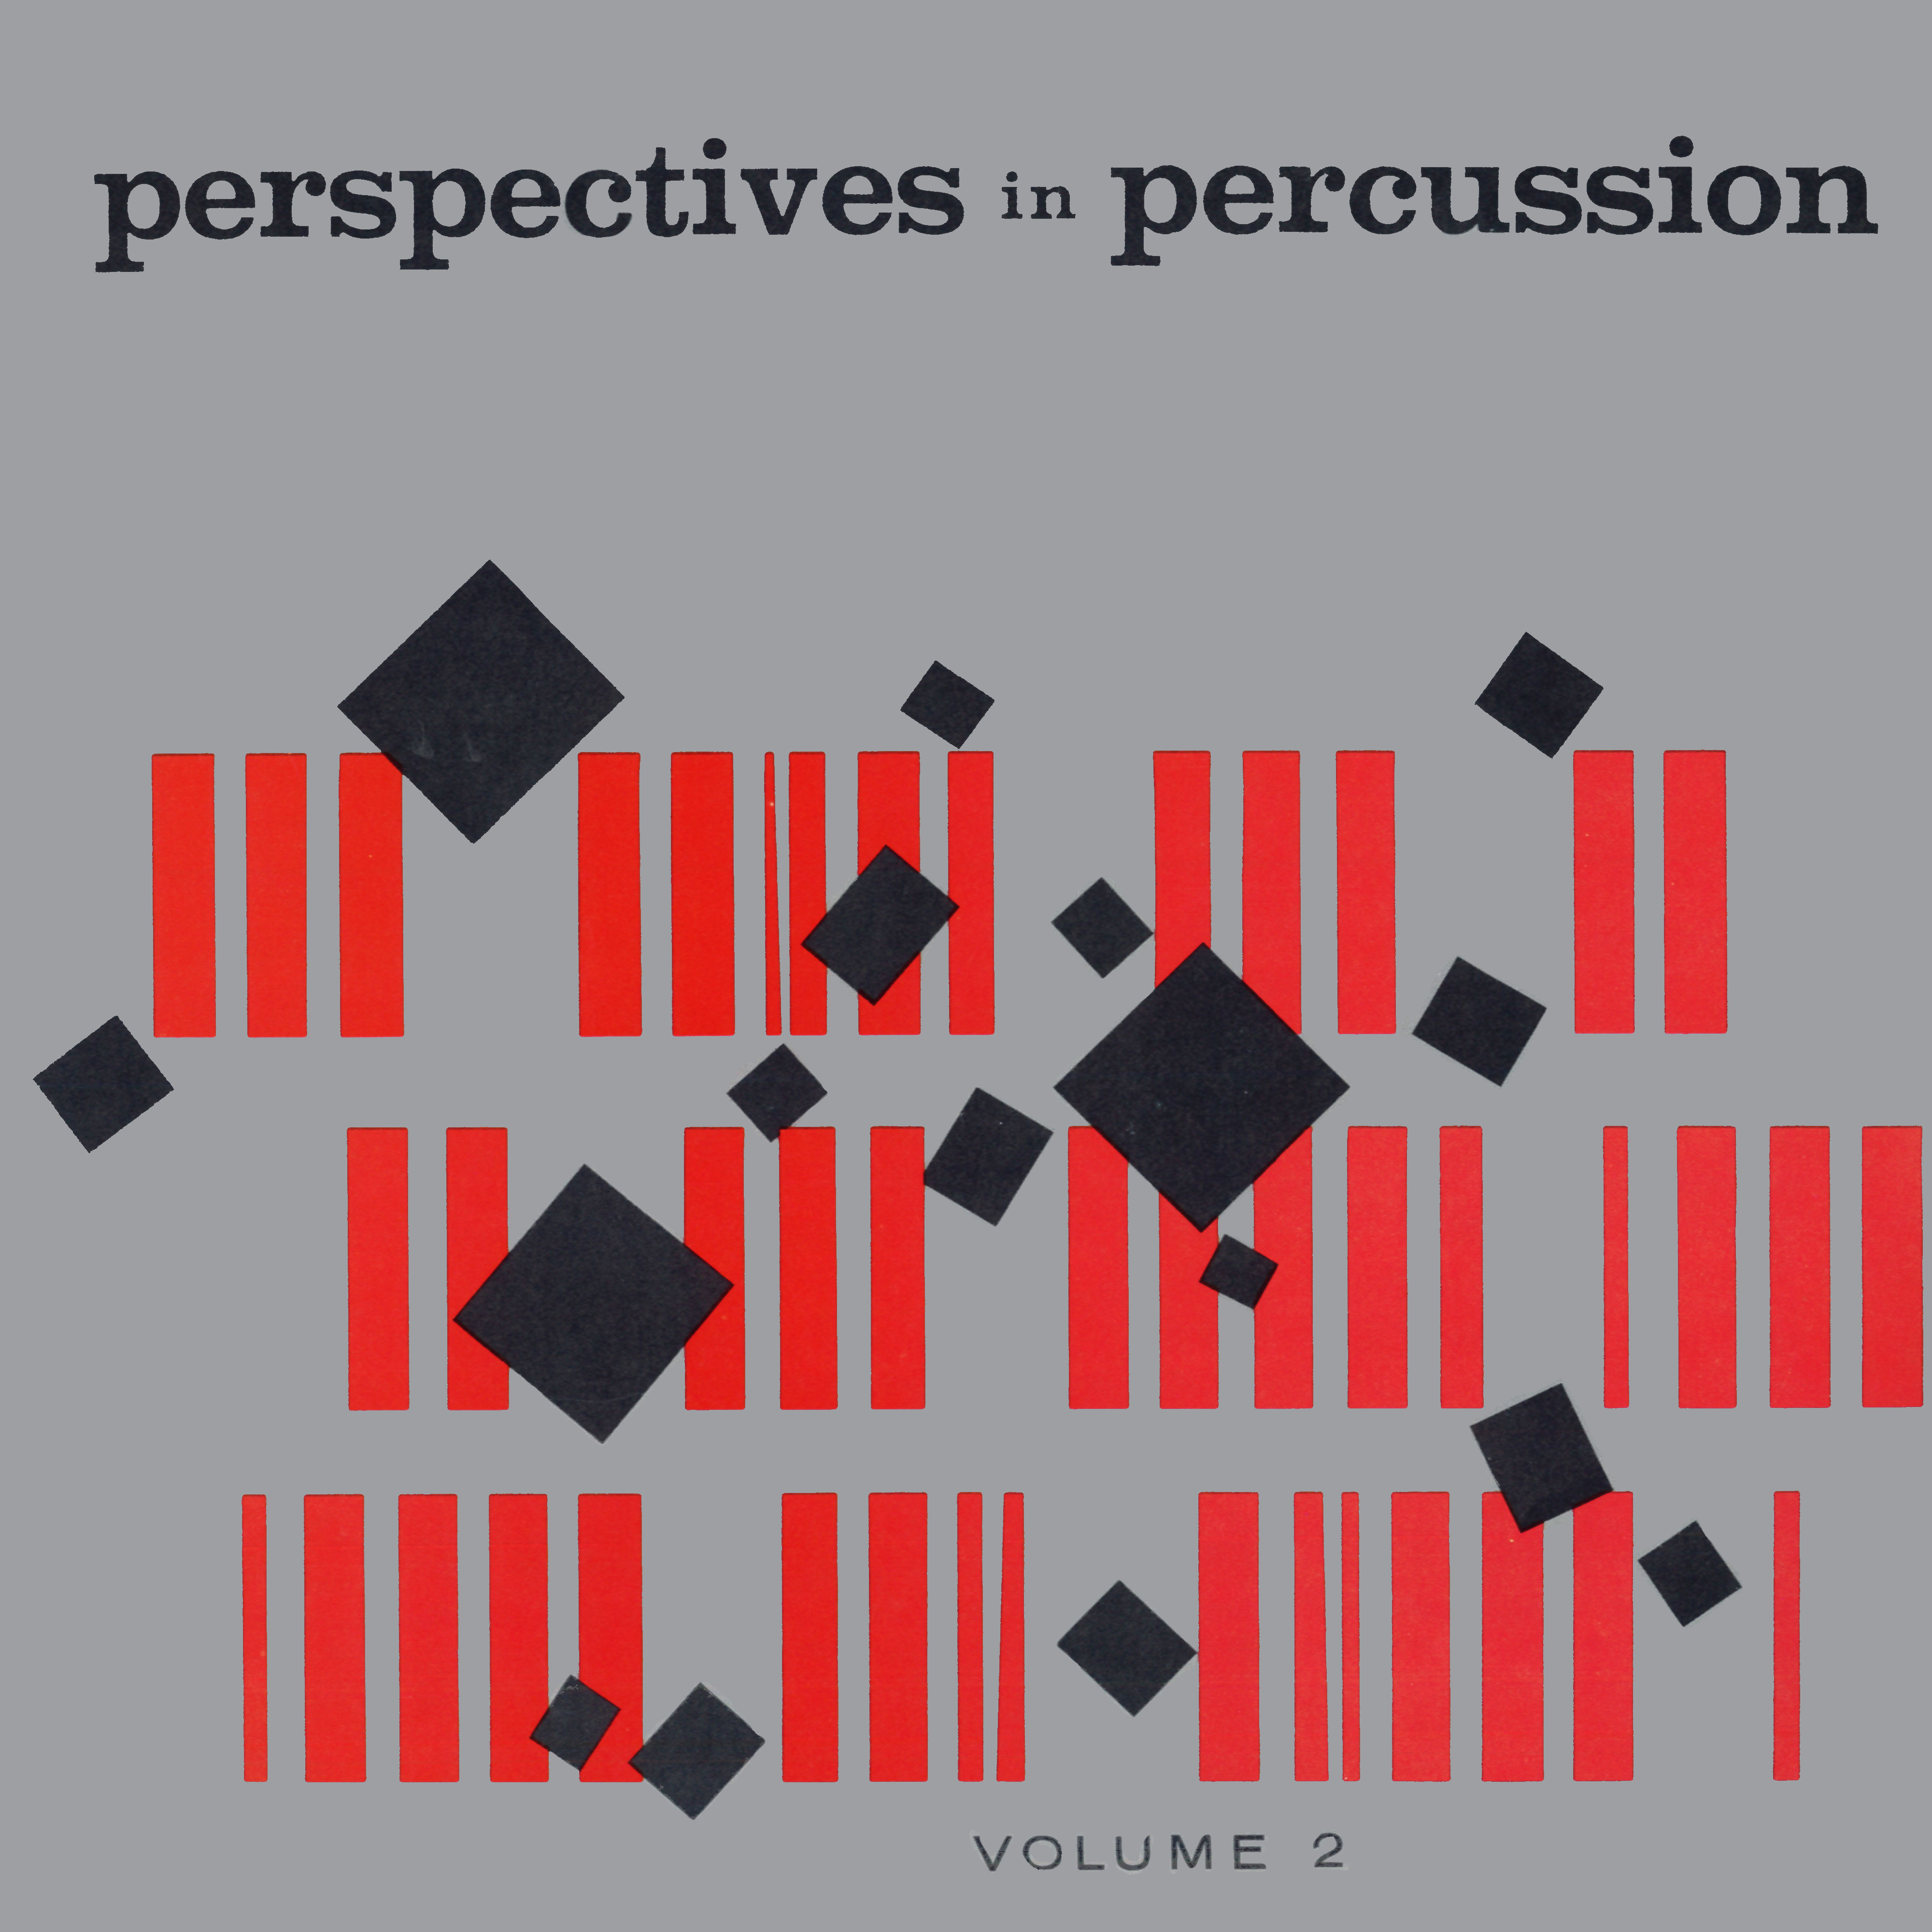 Skip Martin – Perspectives In Percussion, Vol. 2 (Remastered) (1961/2020) [FLAC 24bit/96kHz]